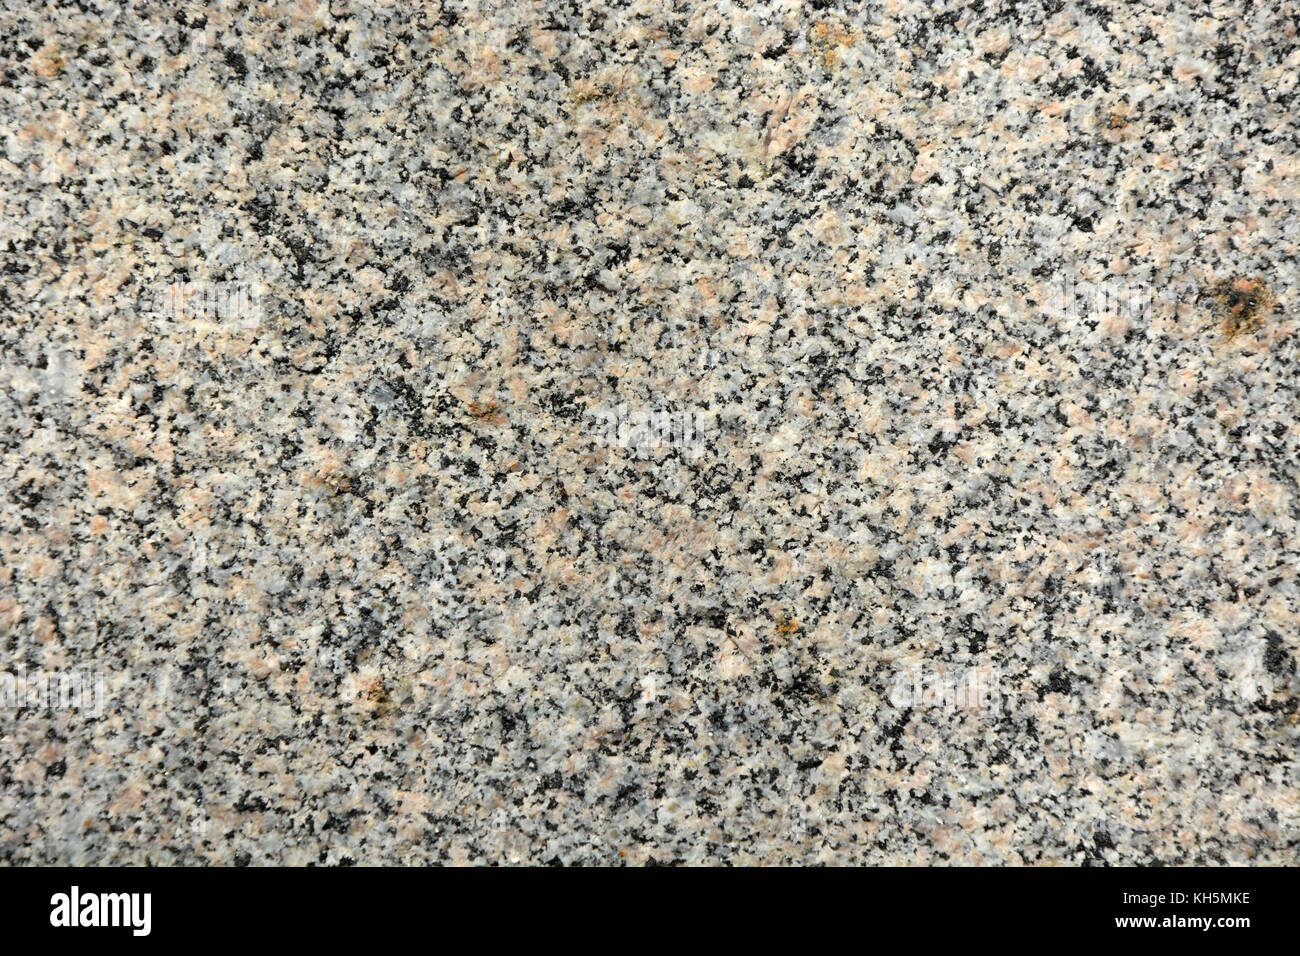 Seamless grey granite texture as a background Stock Photo